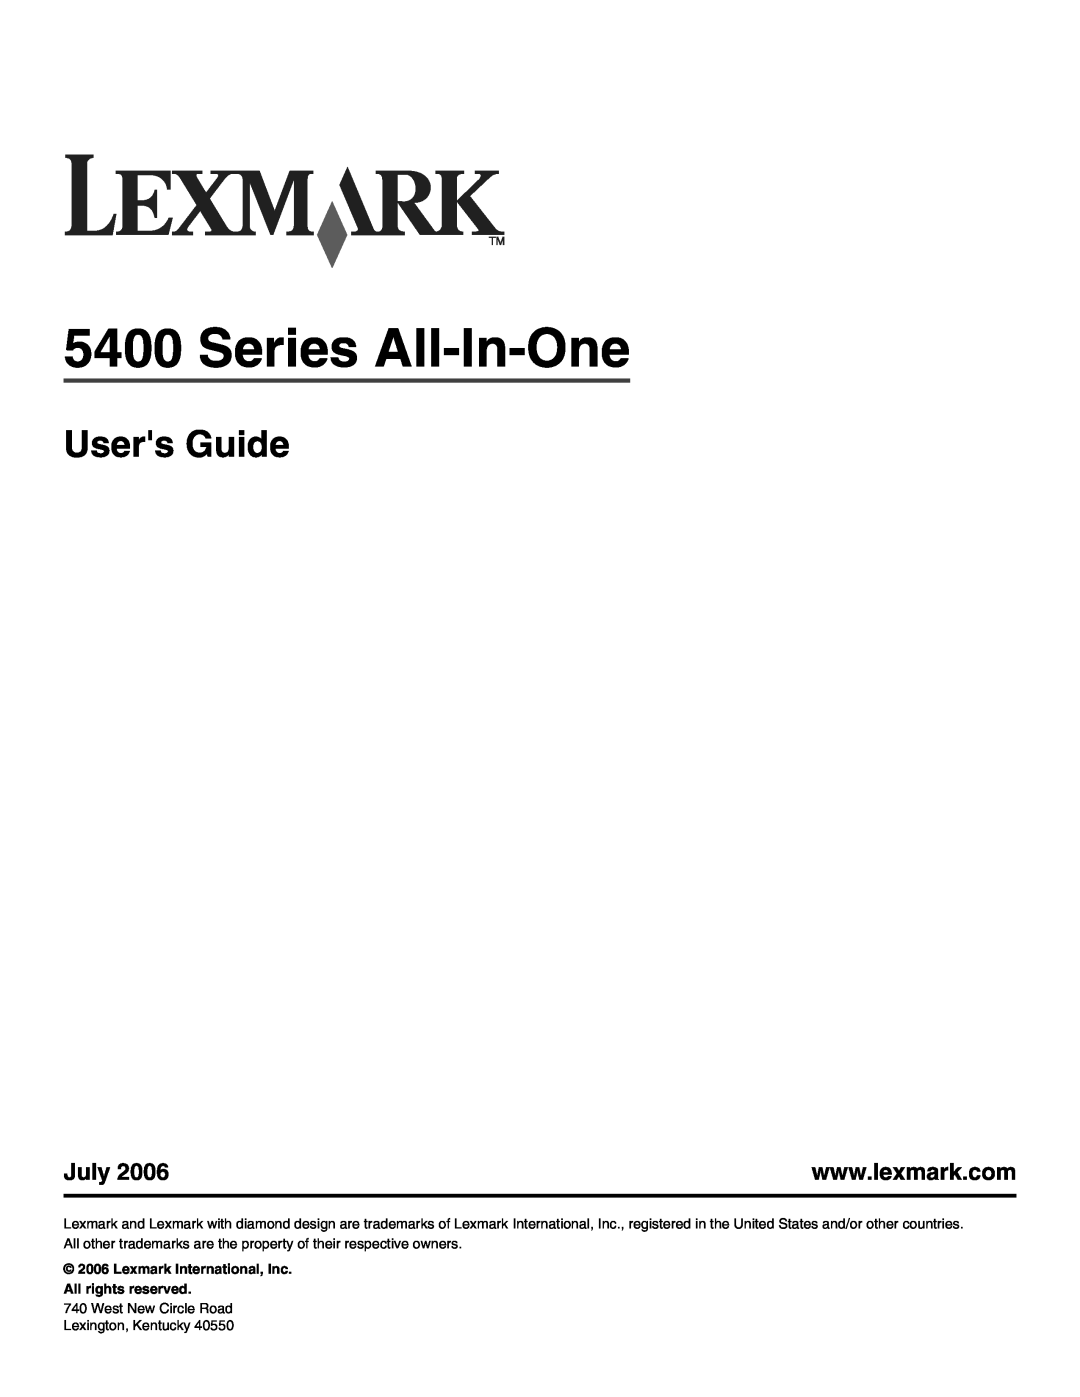 Lexmark 5400 manual Series All-In-One, Users Guide, July, Lexmark International, Inc. All rights reserved 